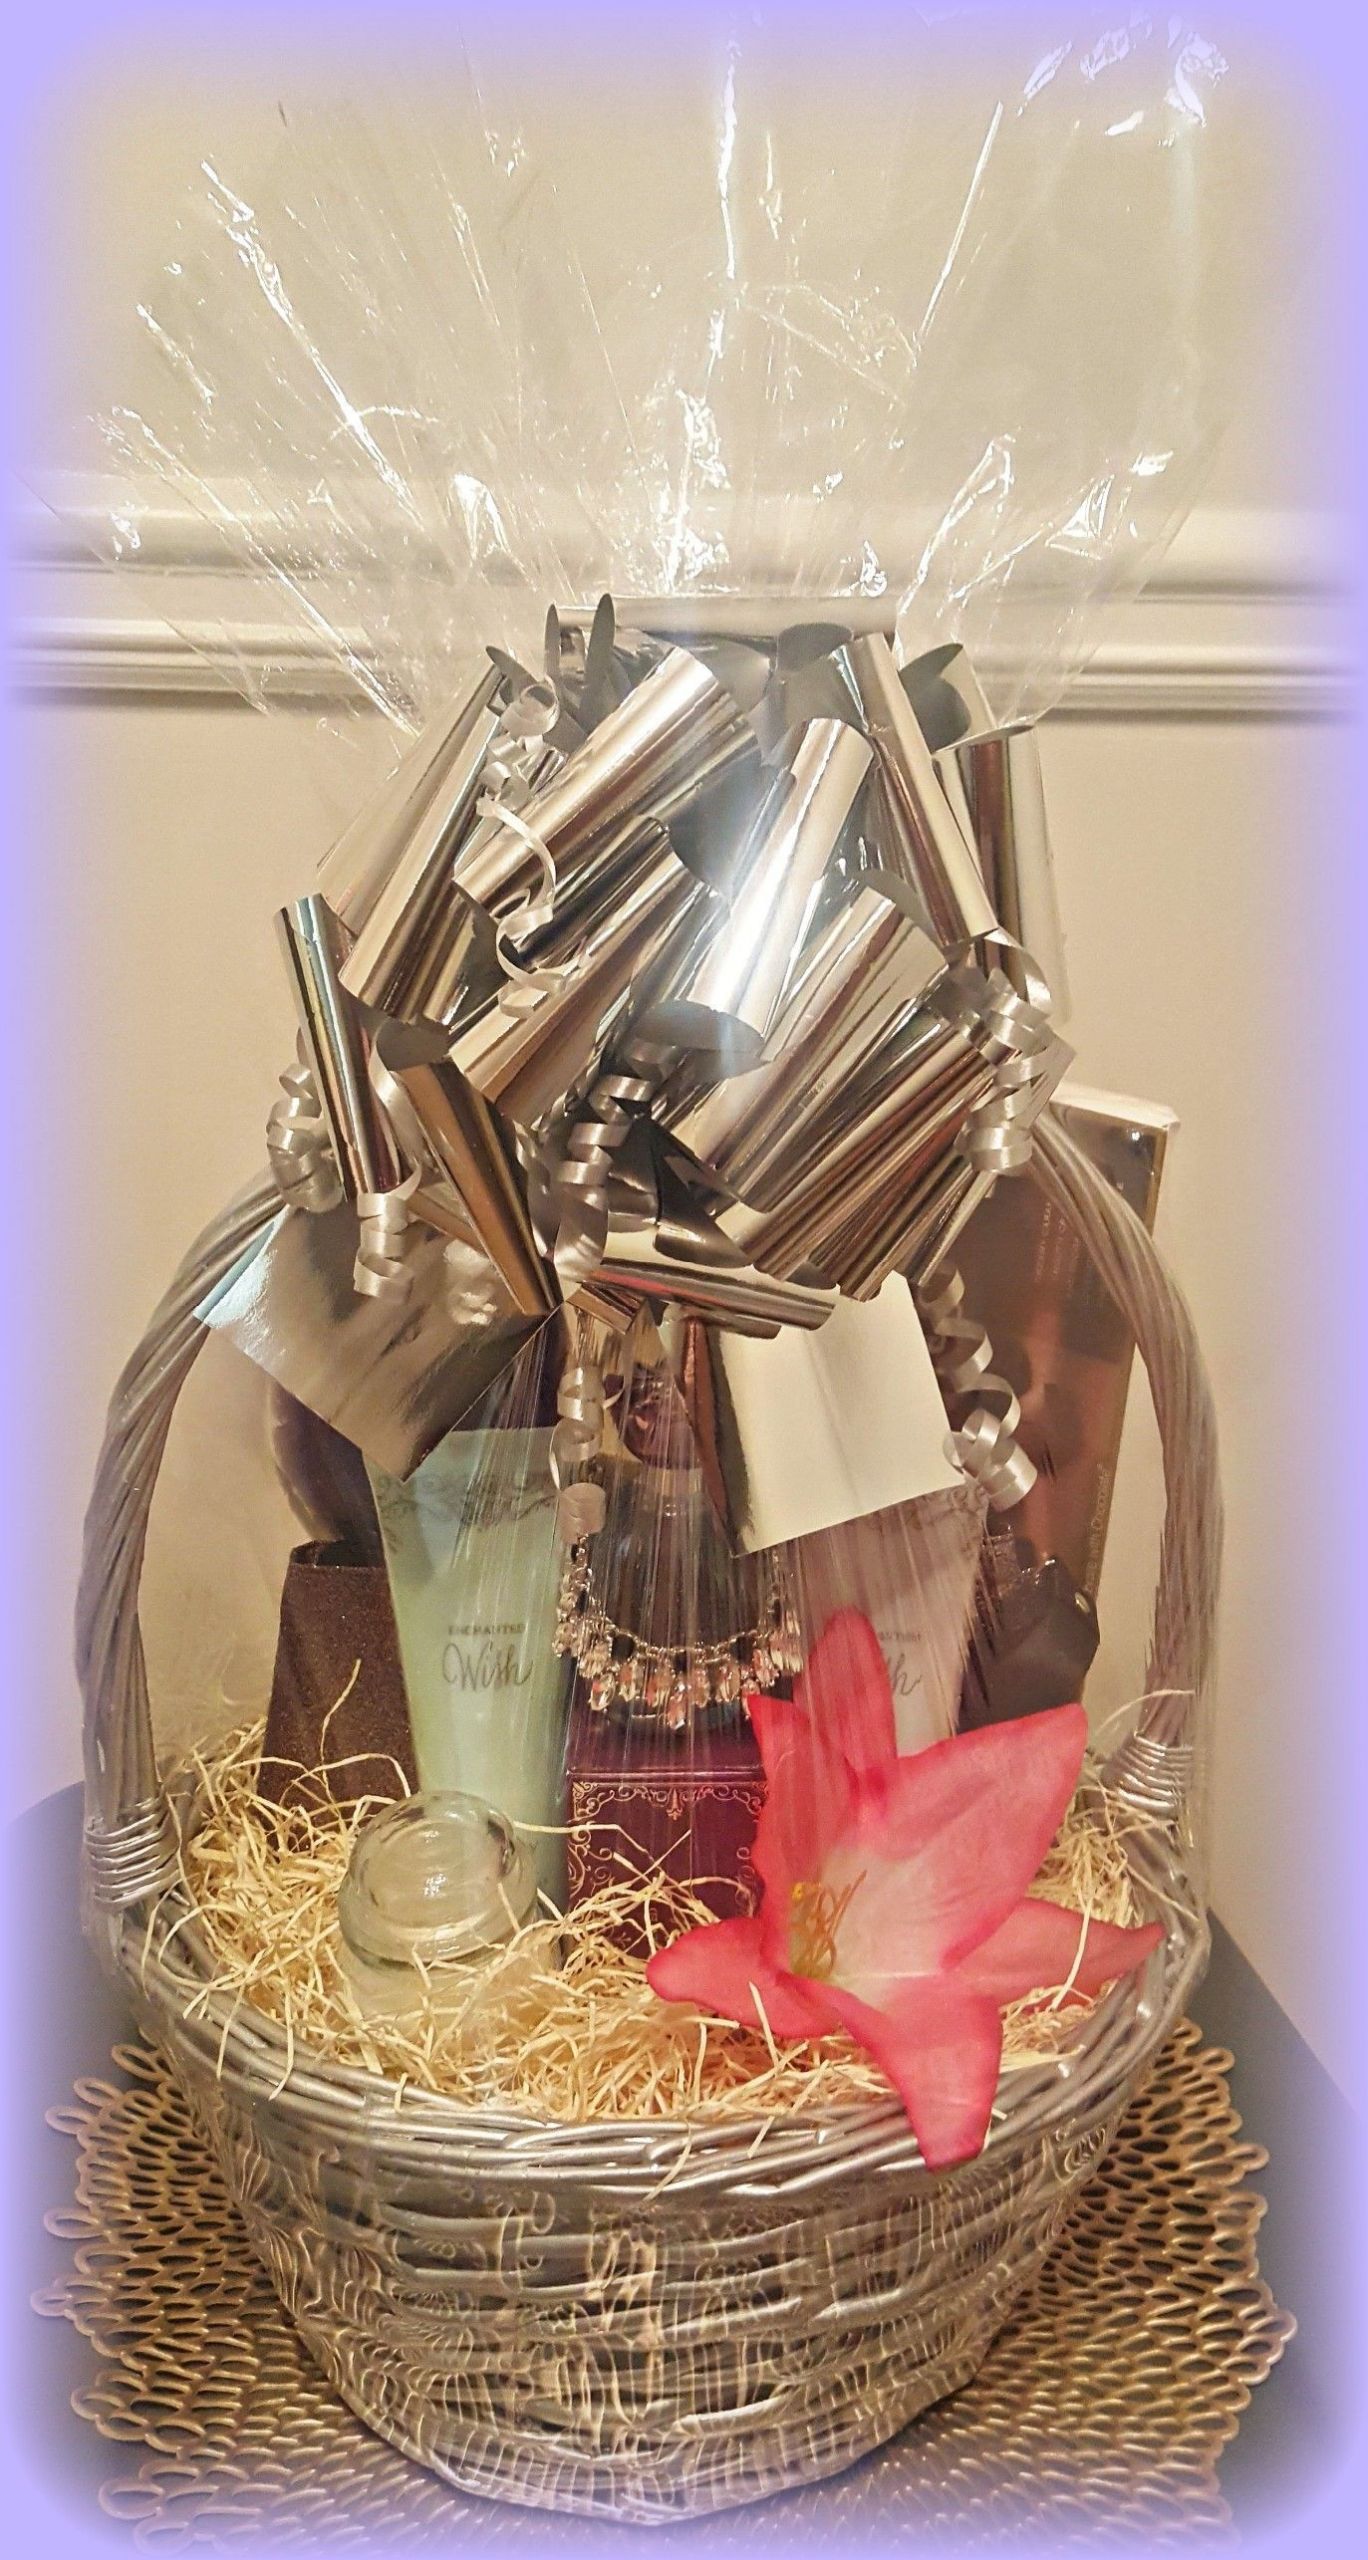 Mary Kay Mother'S Day Gift Basket Ideas
 Order your Gift baskest and Arrangements Shermainejr